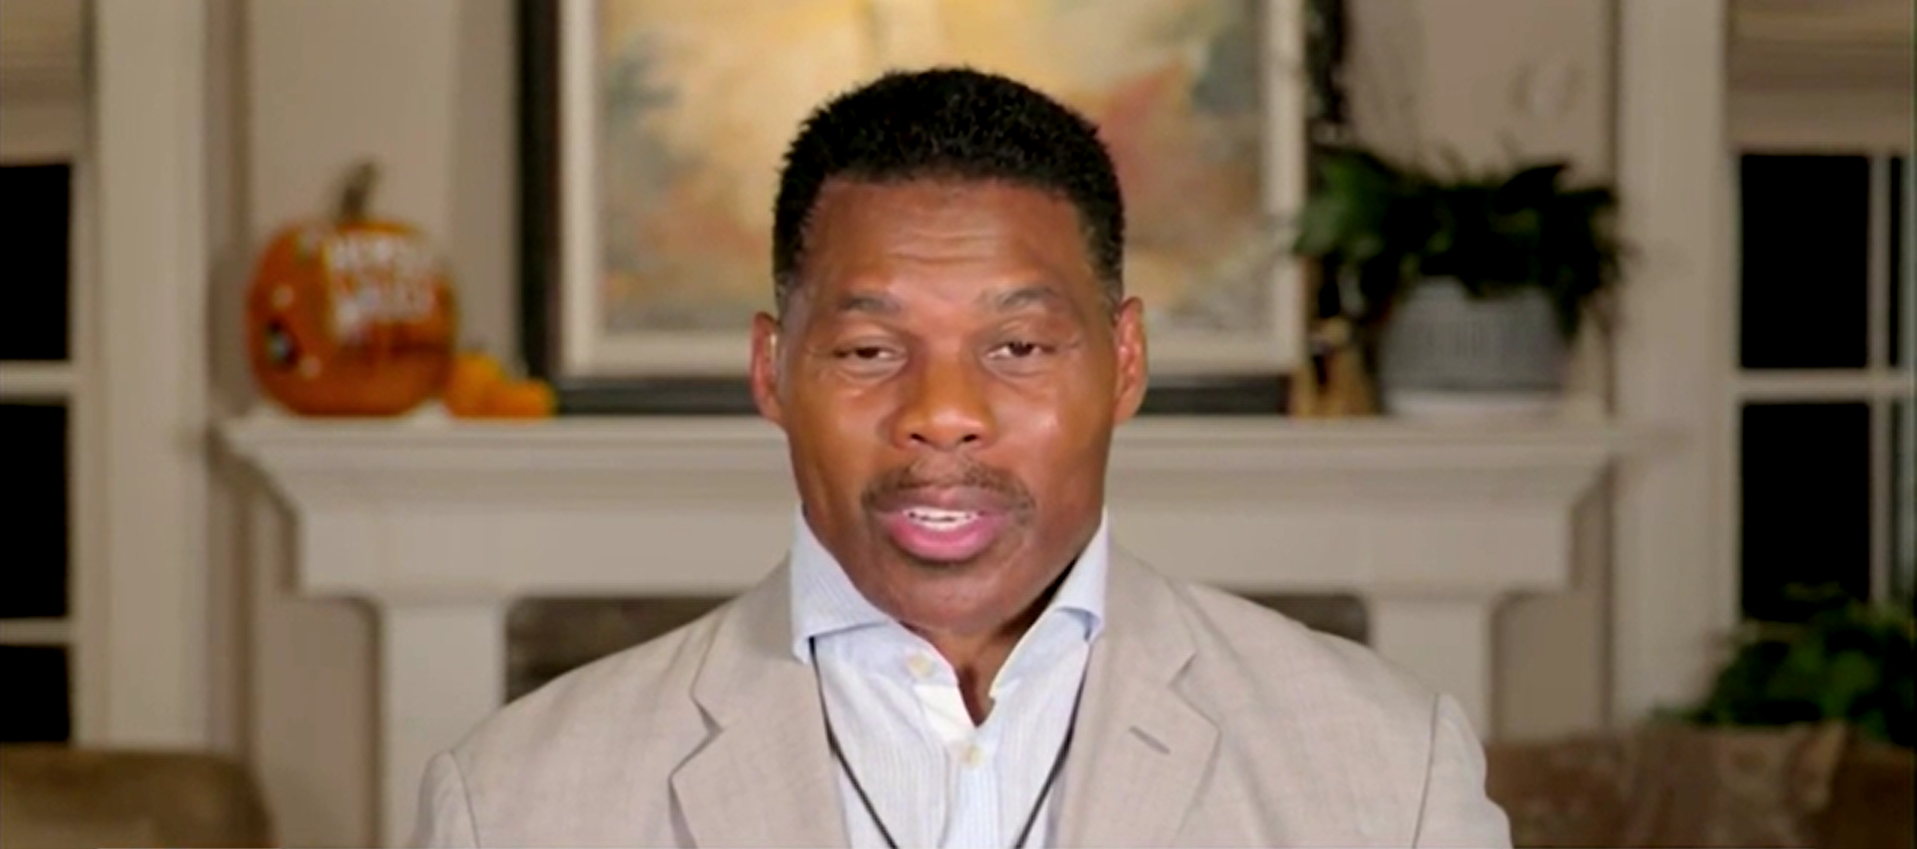 ‘Flat-Out Lie’: Herschel Walker Speaks Out On Reports He Paid For His Girlfriend’s Abortion